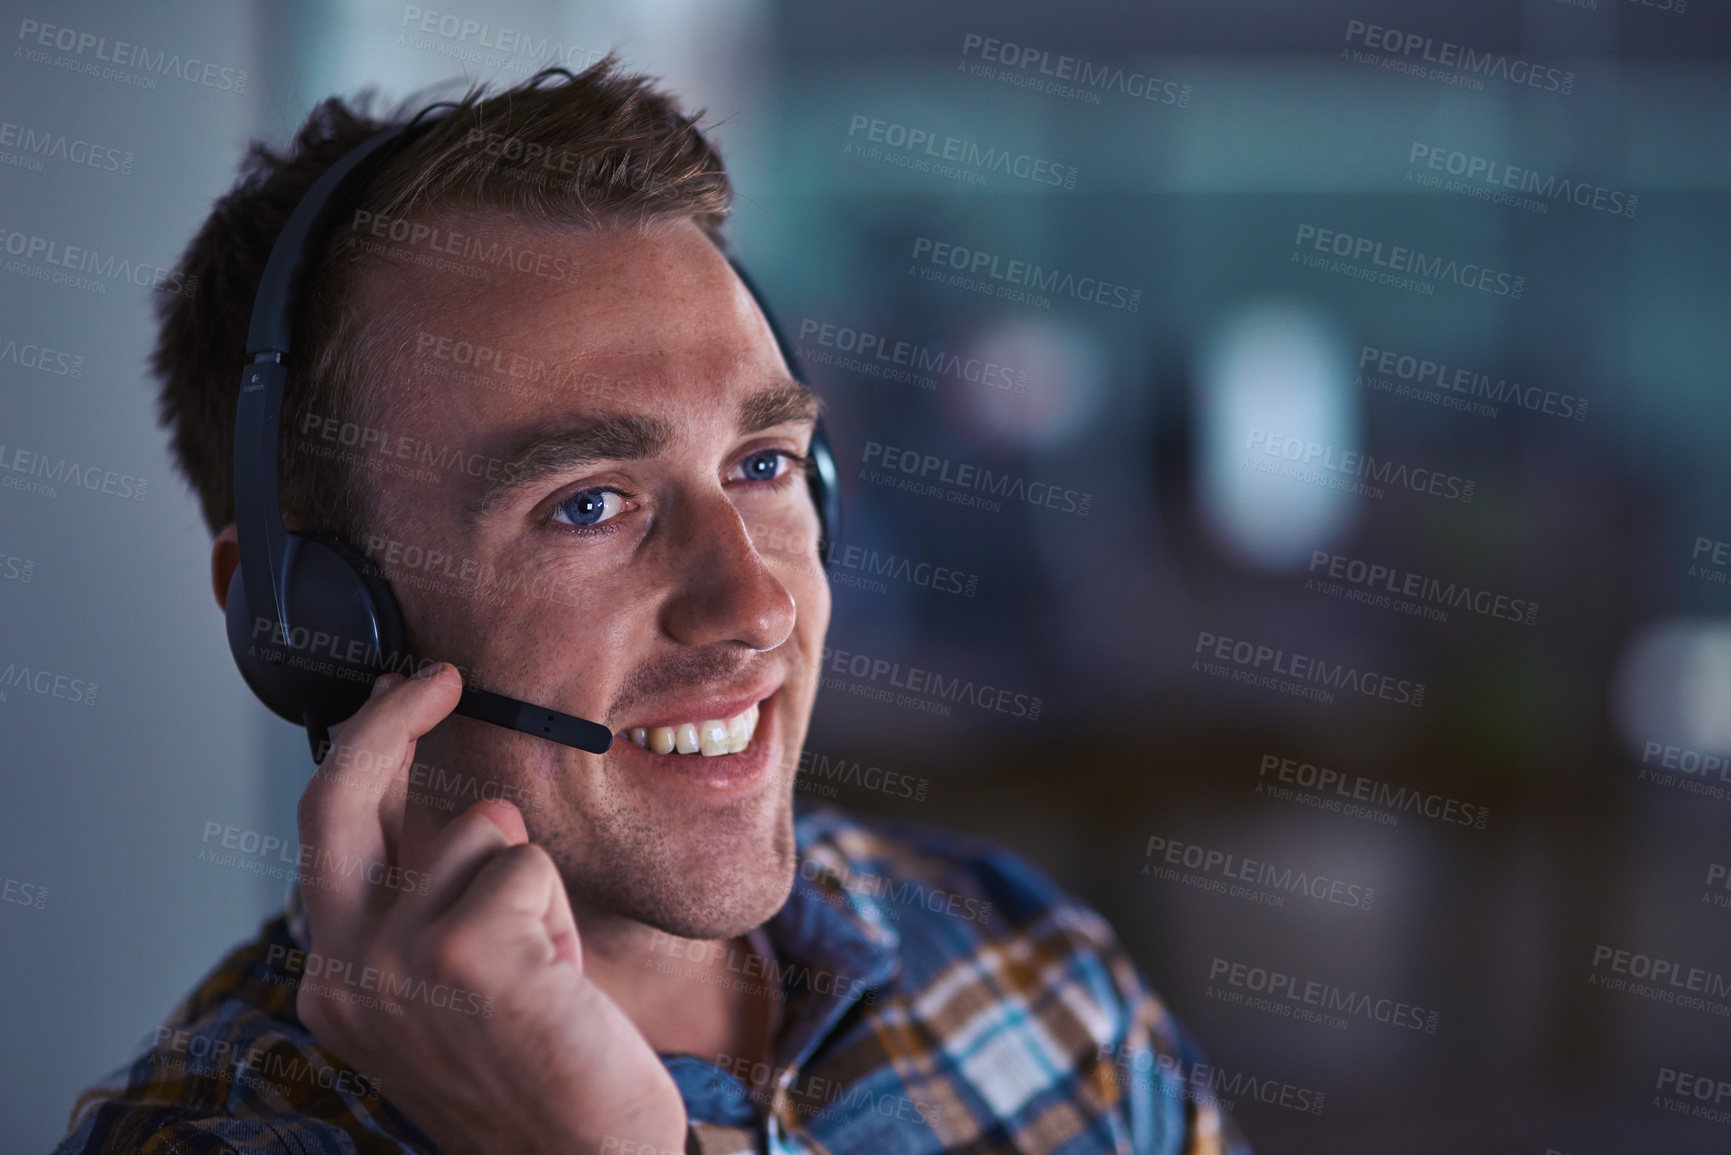 Buy stock photo Shot of a happy customer service agent wearing a headset while sitting in the office